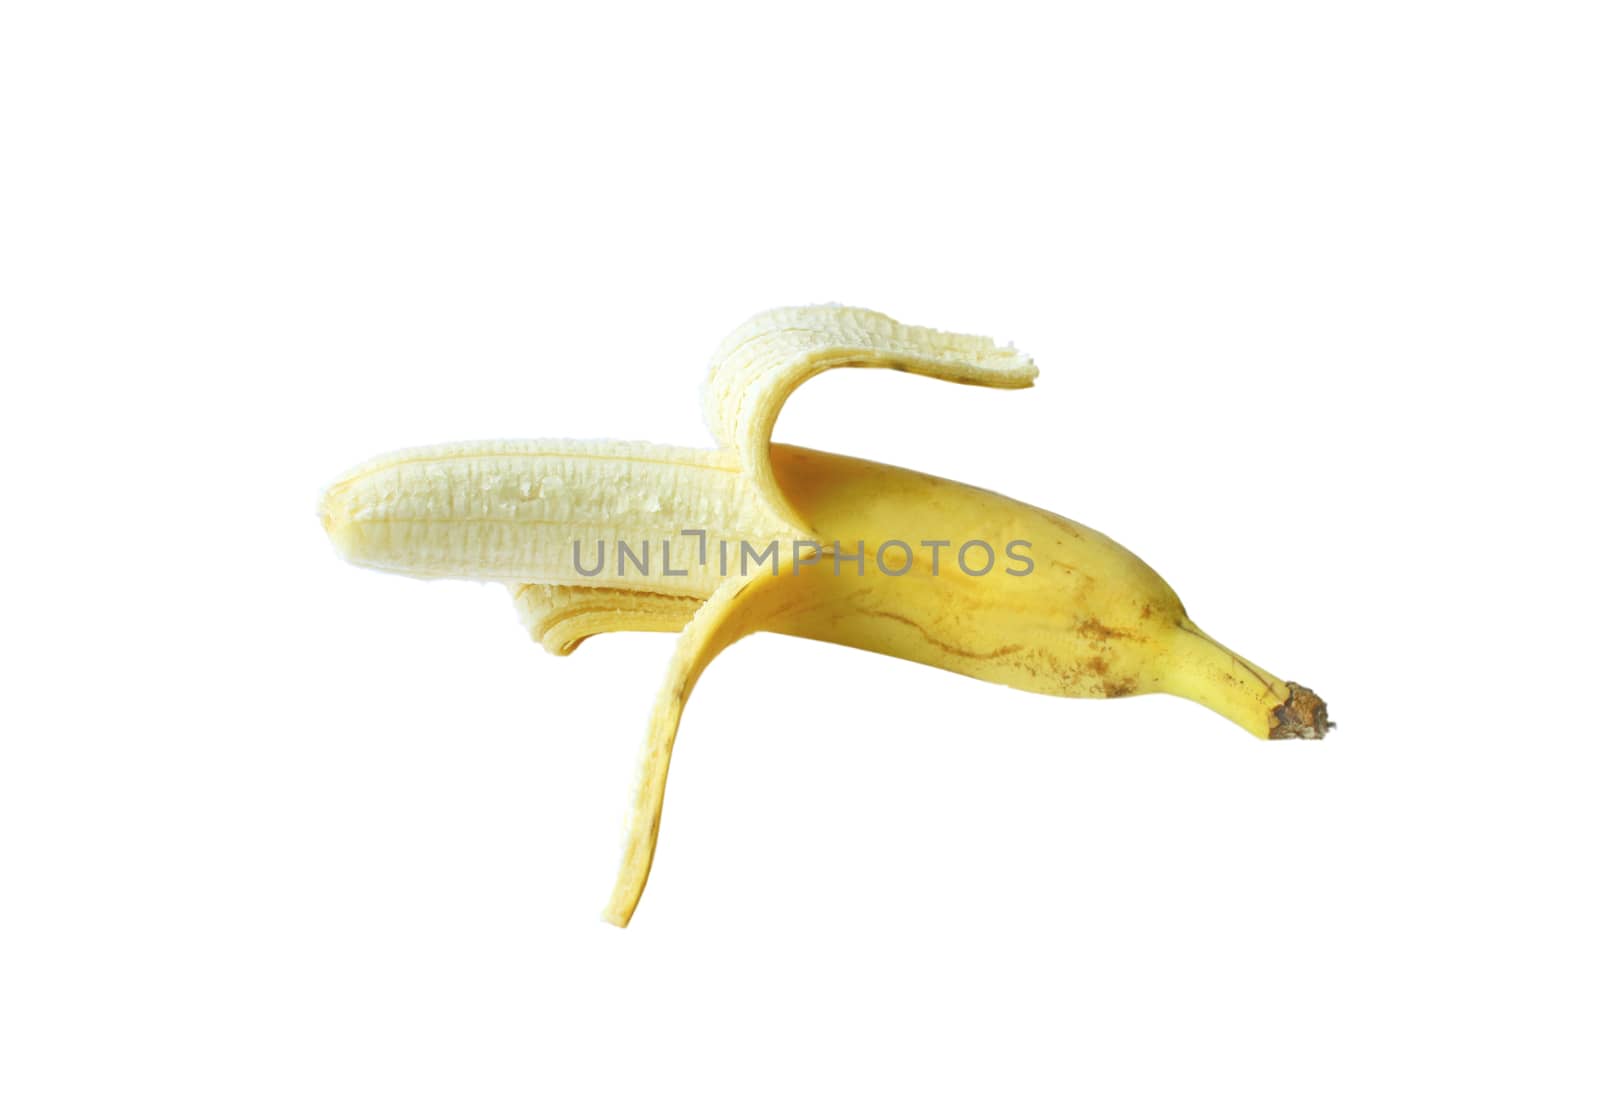 The peeled banana is on a white background